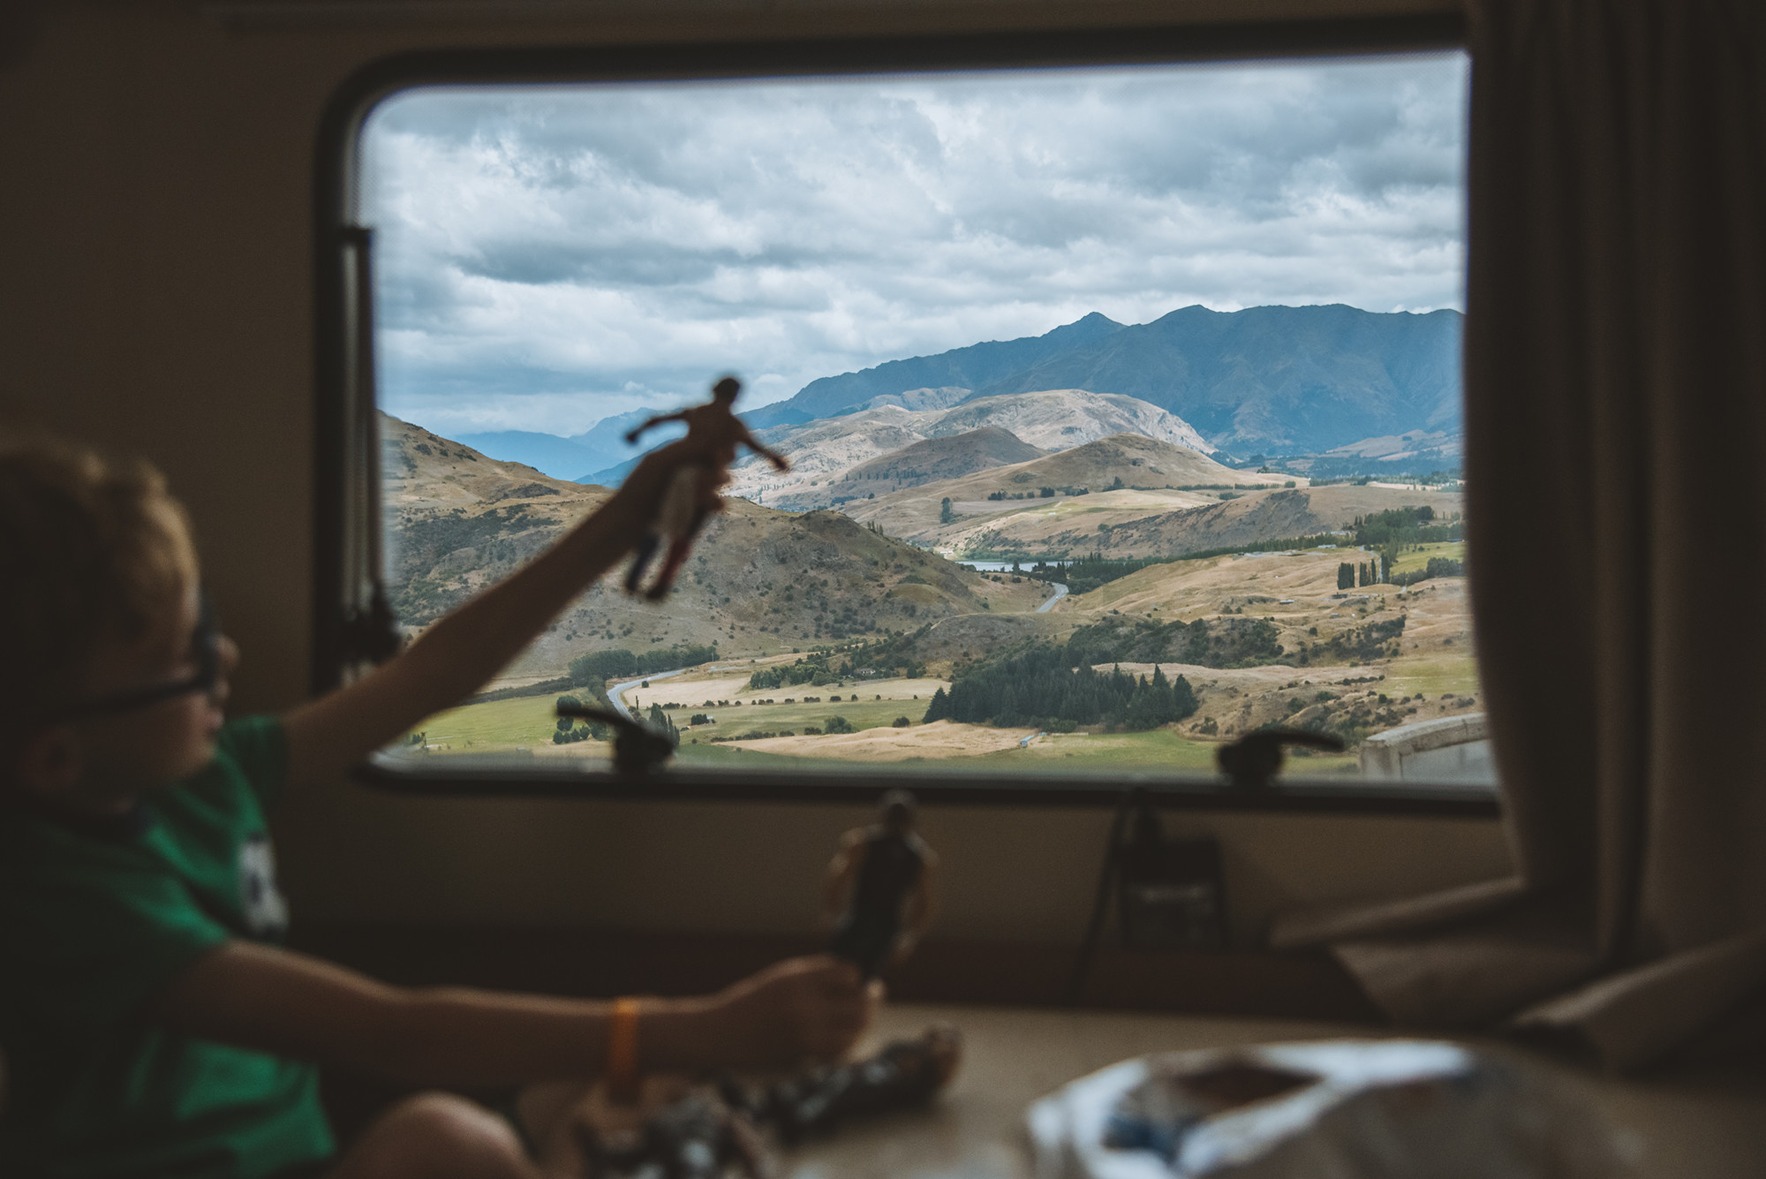 Child playing a toy beside a motorhome window with hills in the backdrop